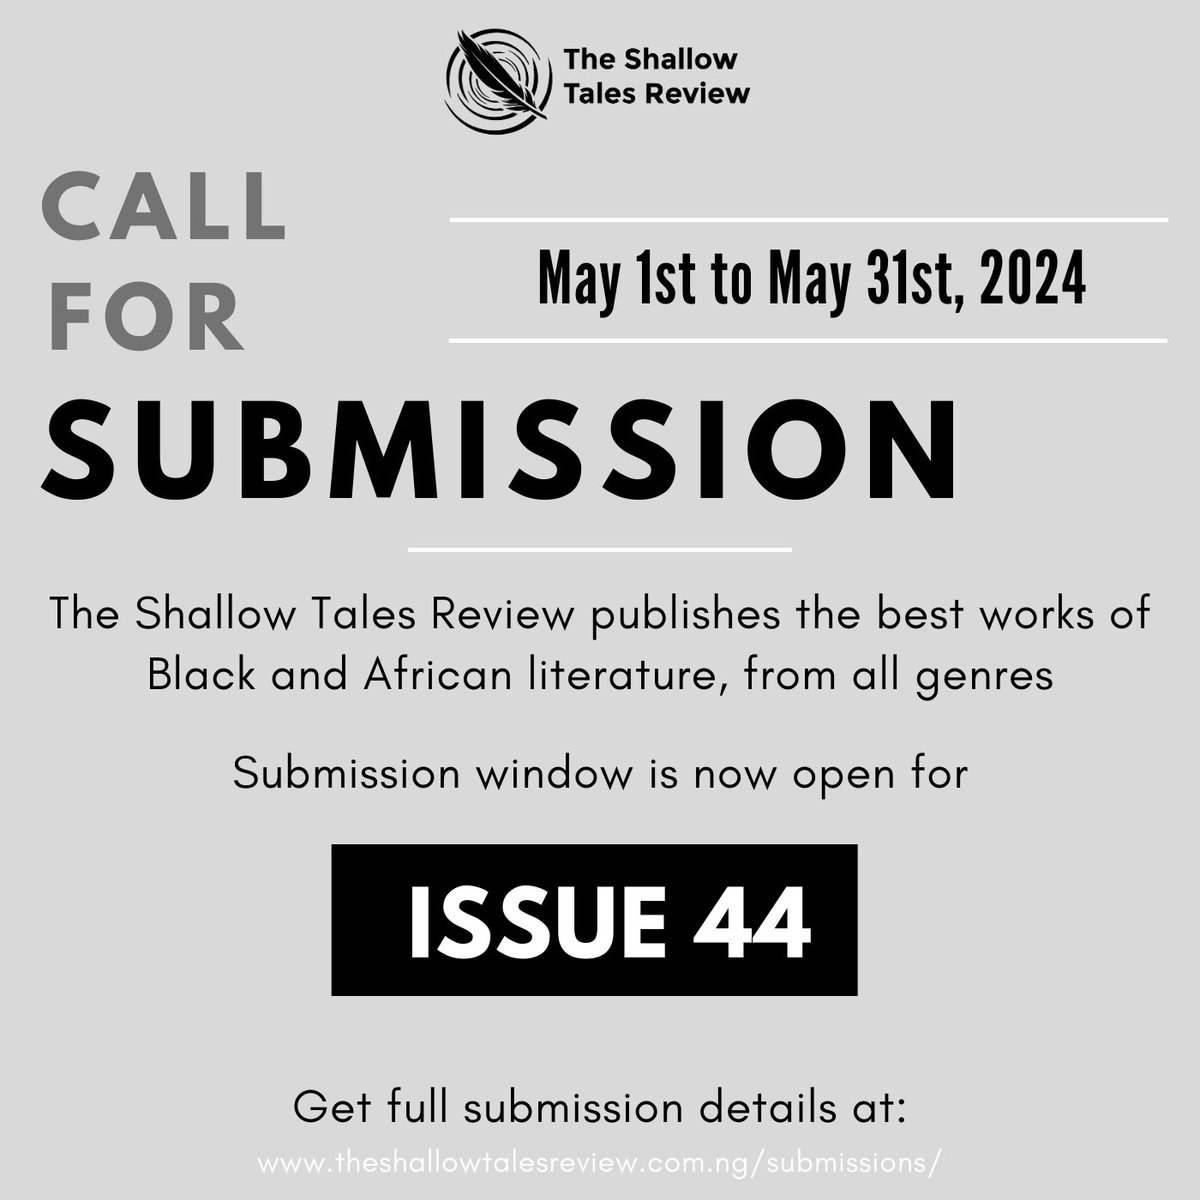 Submissions for issue 44 | May 2024 open May 1st through May 31st. Read the entry guidelines and timelines for more details on submission and the right editors to pitch to. Find link to submission guidelines/timeline here: theshallowtalesreview.com.ng/submissions/